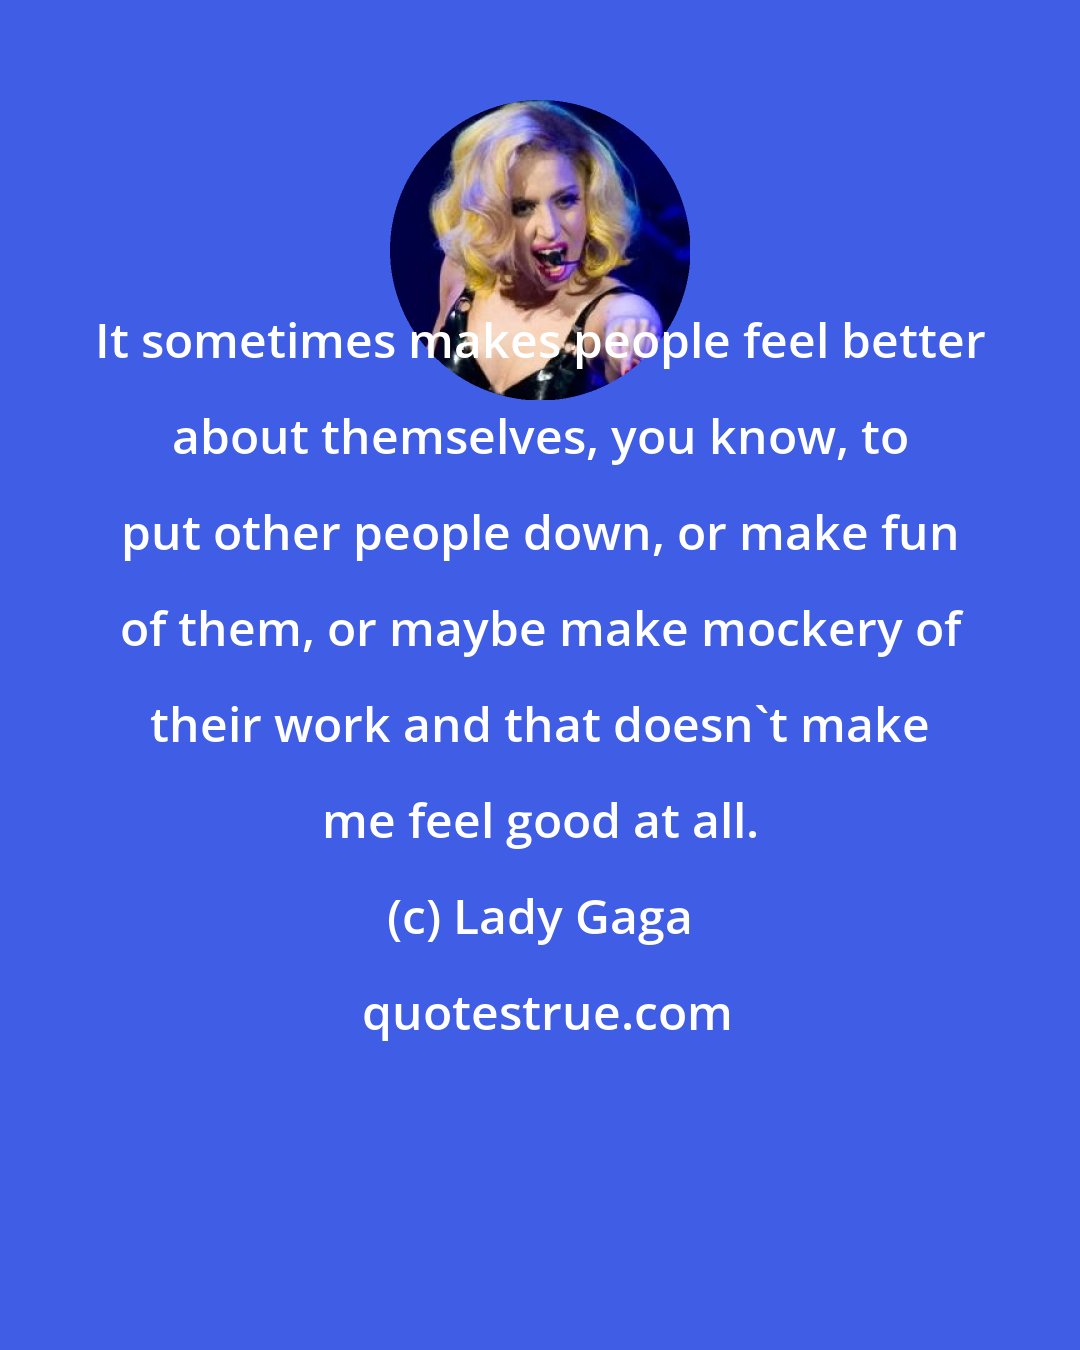 Lady Gaga: It sometimes makes people feel better about themselves, you know, to put other people down, or make fun of them, or maybe make mockery of their work and that doesn't make me feel good at all.